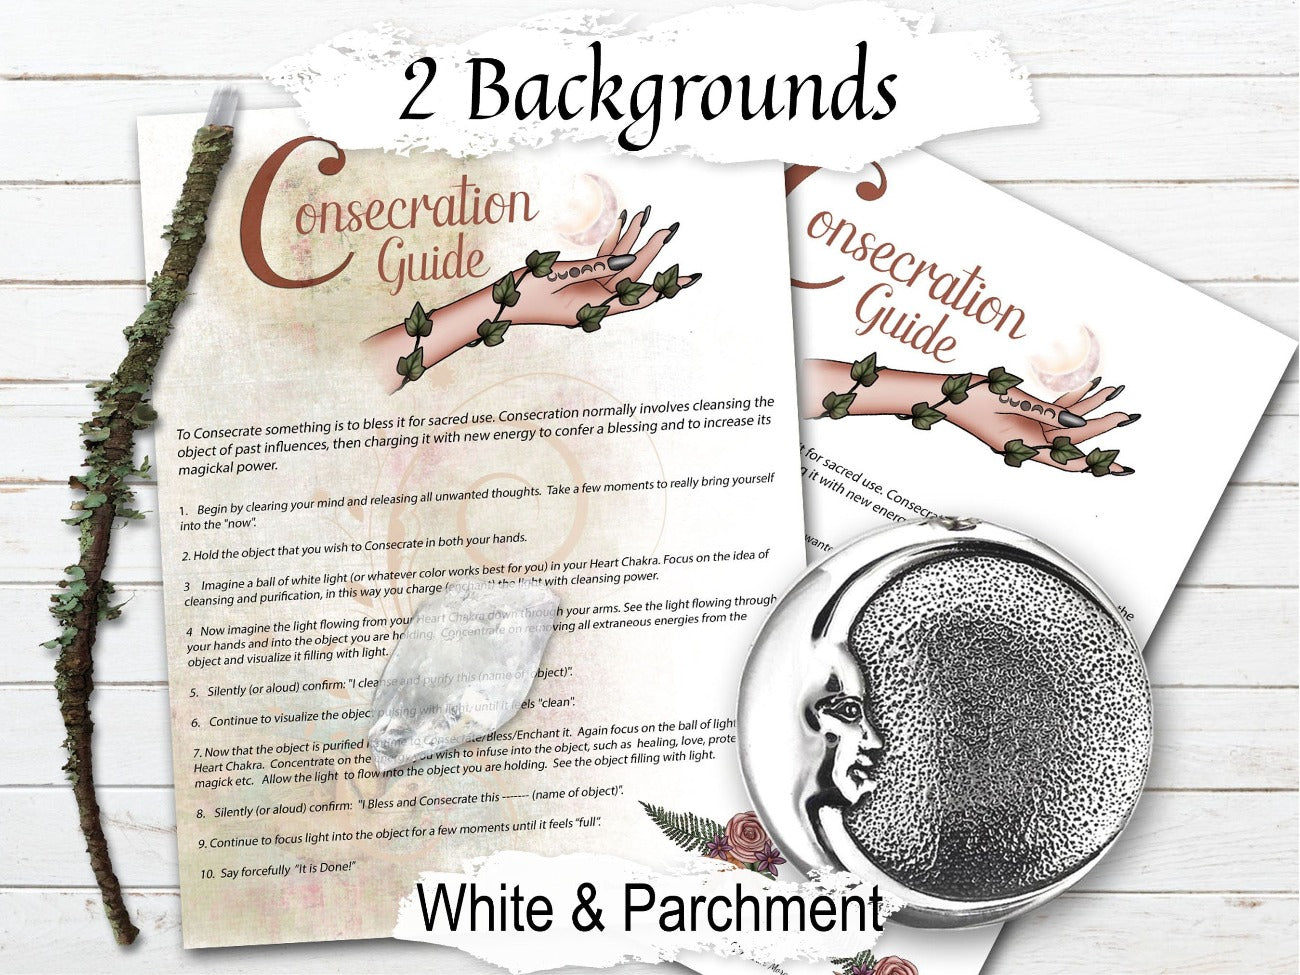 CONSECRATION GUIDE, How To Consecrate Empower Enchant, Wicca Witchcraft Blessing Ritual of Sacred Tools, Witchcraft Grimoire Blessing Spell - Morgana Magick Spell